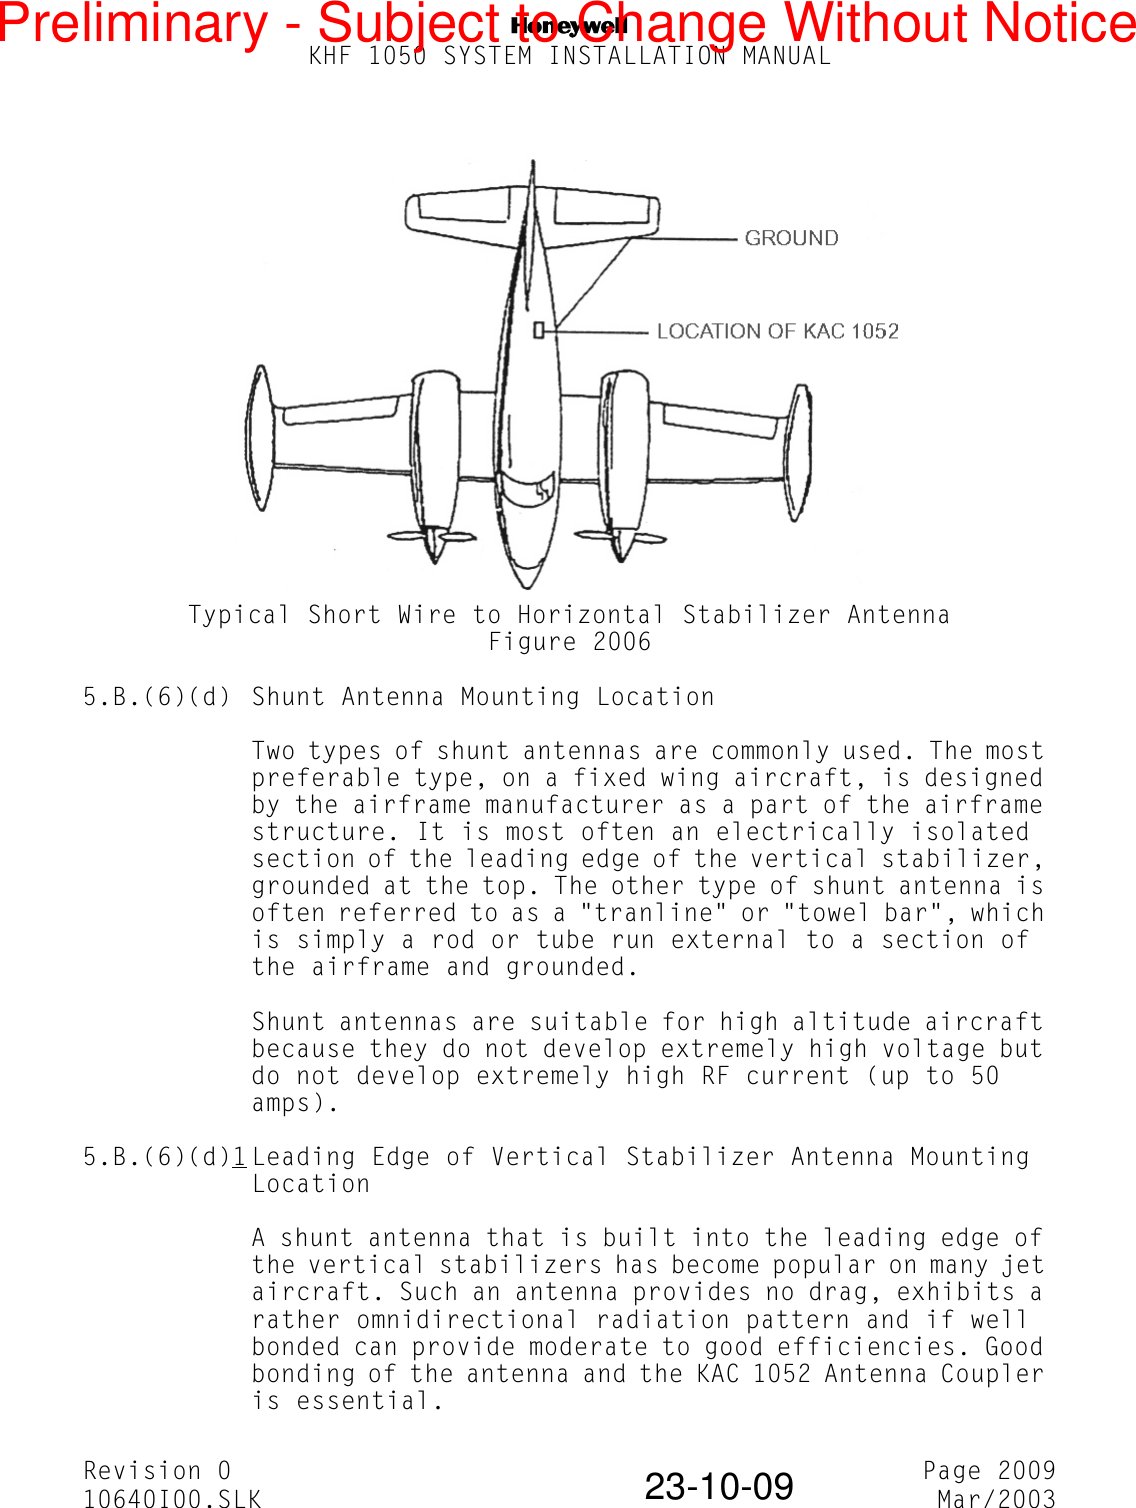 NKHF 1050 SYSTEM INSTALLATION MANUALRevision 0 Page 200910640I00.SLK Mar/200323-10-09Typical Short Wire to Horizontal Stabilizer AntennaFigure 20065.B.(6)(d) Shunt Antenna Mounting LocationTwo types of shunt antennas are commonly used. The most preferable type, on a fixed wing aircraft, is designed by the airframe manufacturer as a part of the airframe structure. It is most often an electrically isolated section of the leading edge of the vertical stabilizer, grounded at the top. The other type of shunt antenna is often referred to as a &quot;tranline&quot; or &quot;towel bar&quot;, which is simply a rod or tube run external to a section of the airframe and grounded.Shunt antennas are suitable for high altitude aircraft because they do not develop extremely high voltage but do not develop extremely high RF current (up to 50 amps).5.B.(6)(d)1 Leading Edge of Vertical Stabilizer Antenna Mounting LocationA shunt antenna that is built into the leading edge of the vertical stabilizers has become popular on many jet aircraft. Such an antenna provides no drag, exhibits a rather omnidirectional radiation pattern and if well bonded can provide moderate to good efficiencies. Good bonding of the antenna and the KAC 1052 Antenna Coupler is essential.Preliminary - Subject to Change Without Notice